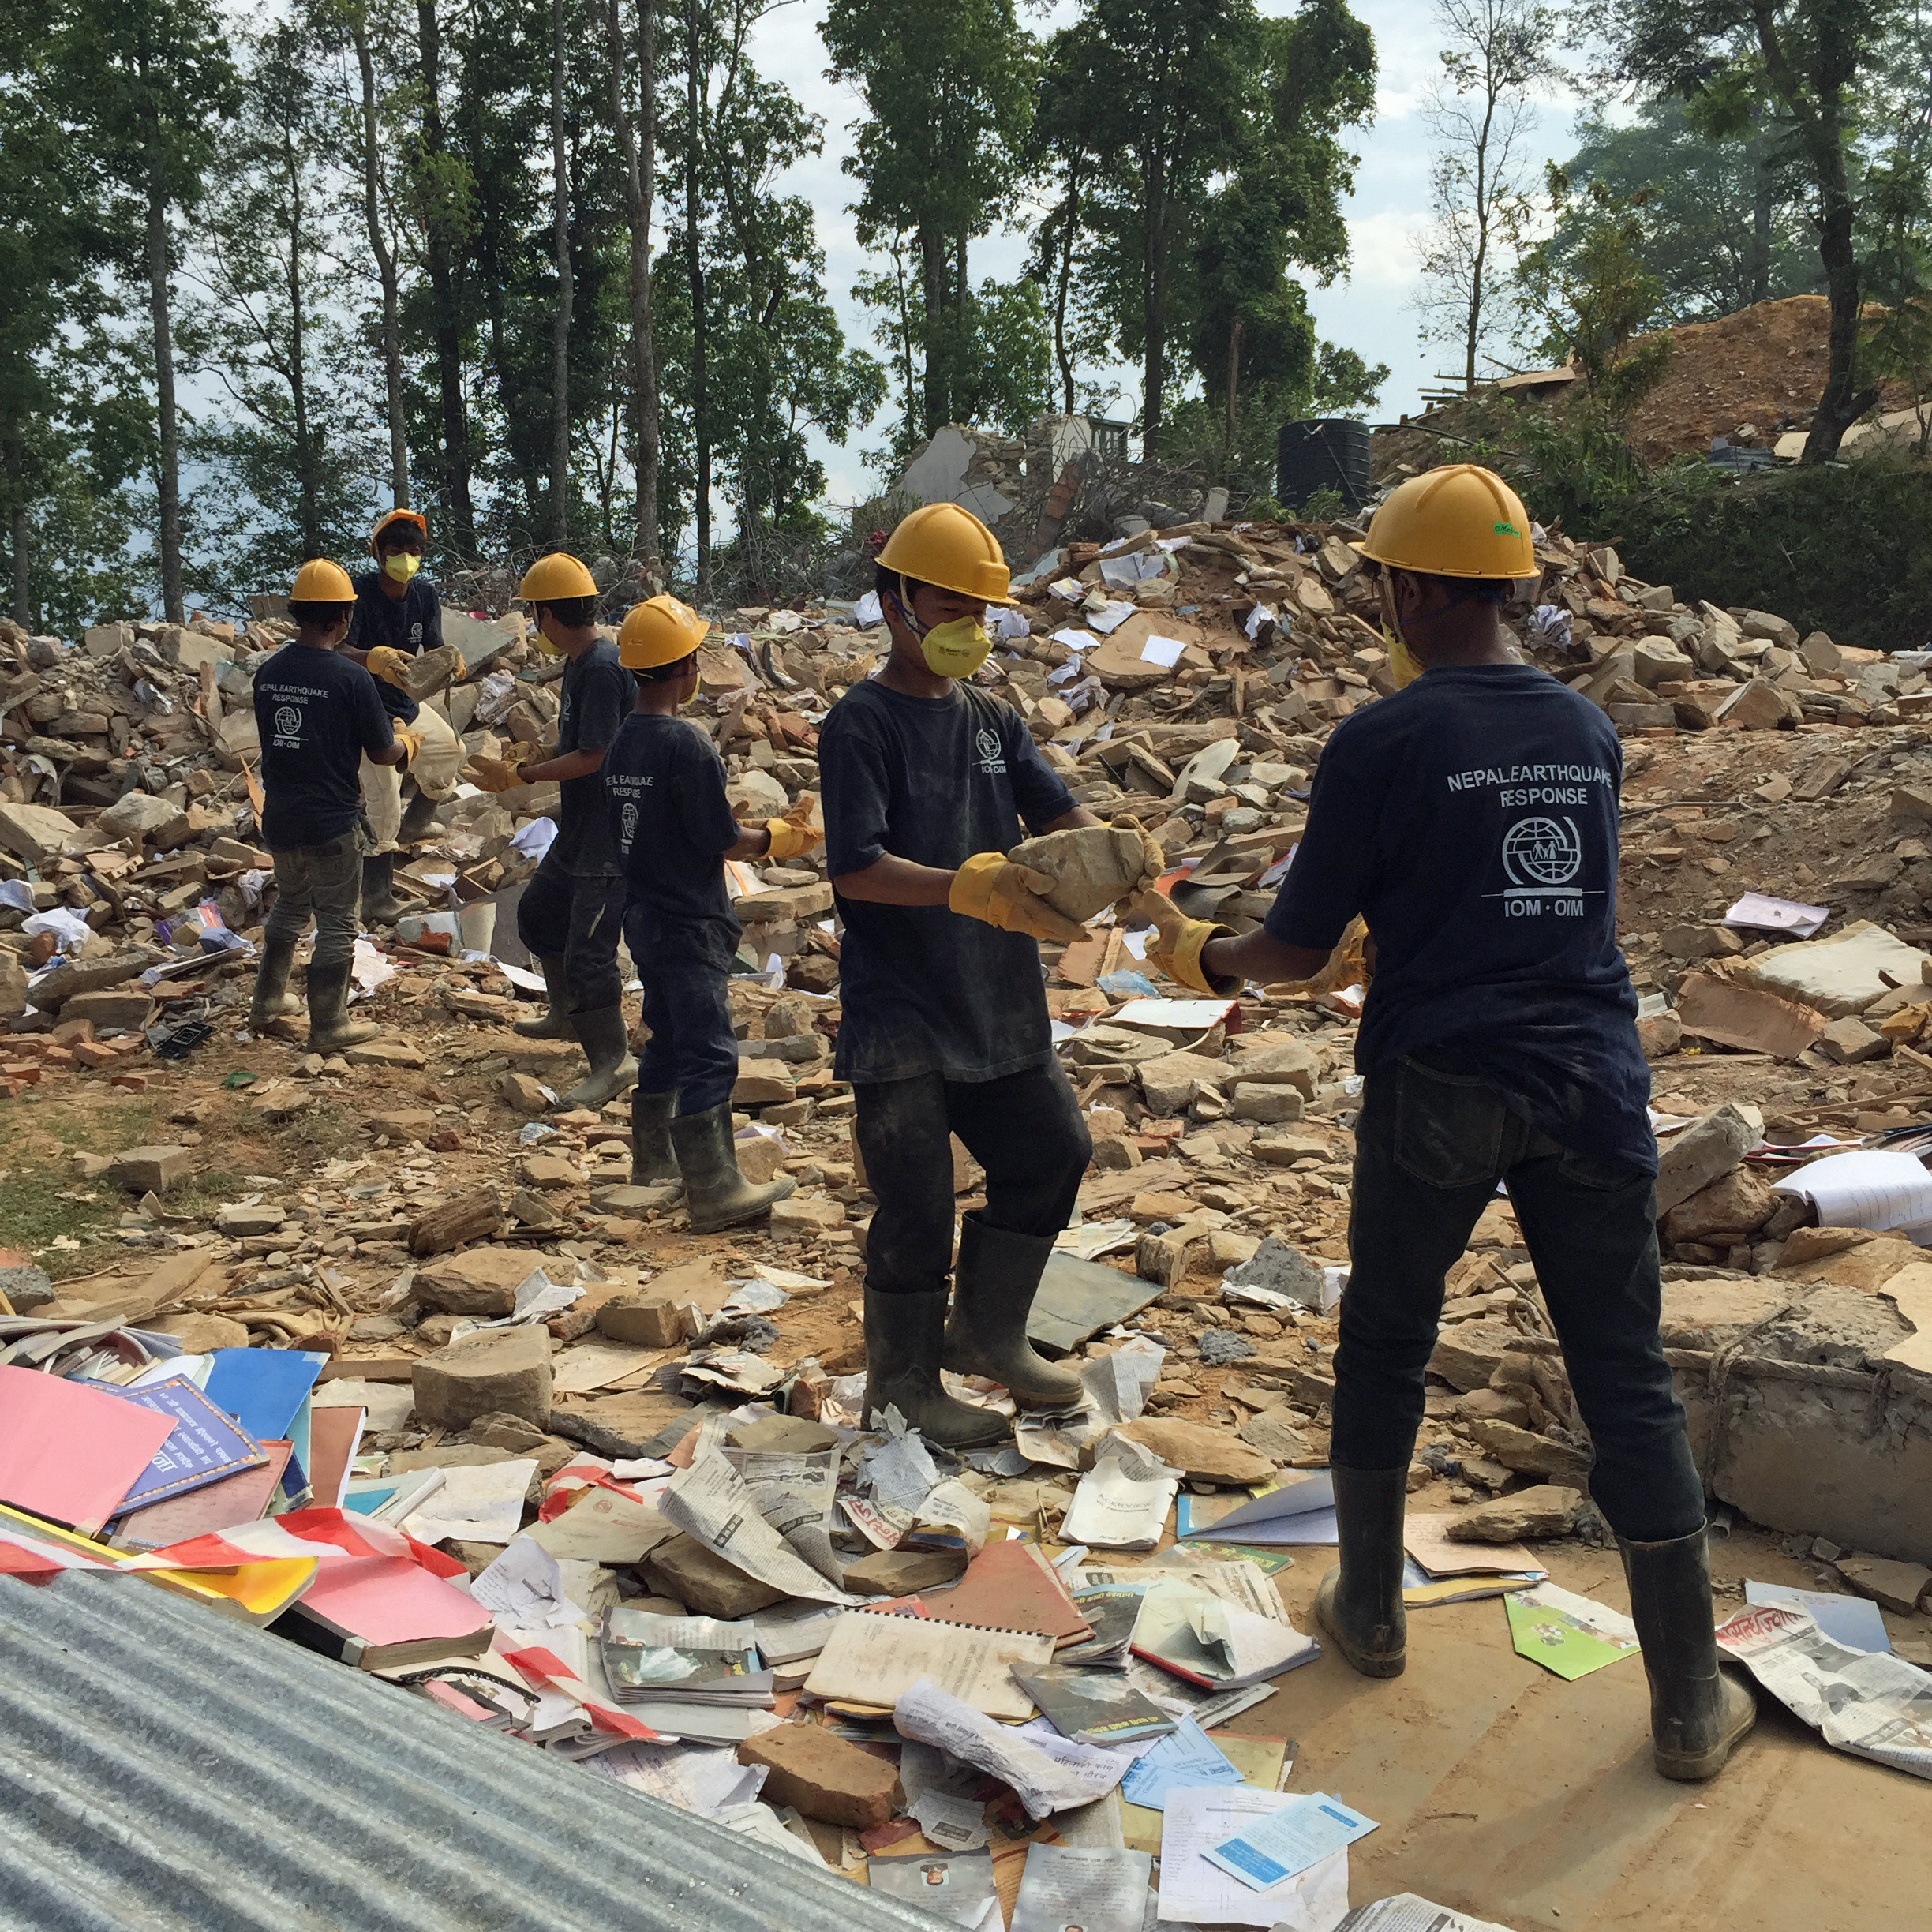 The International Organisation for Migration (IOM) is helping to move rubble in the town of Chautara after the heavy earthquake in Nepal in 2015.